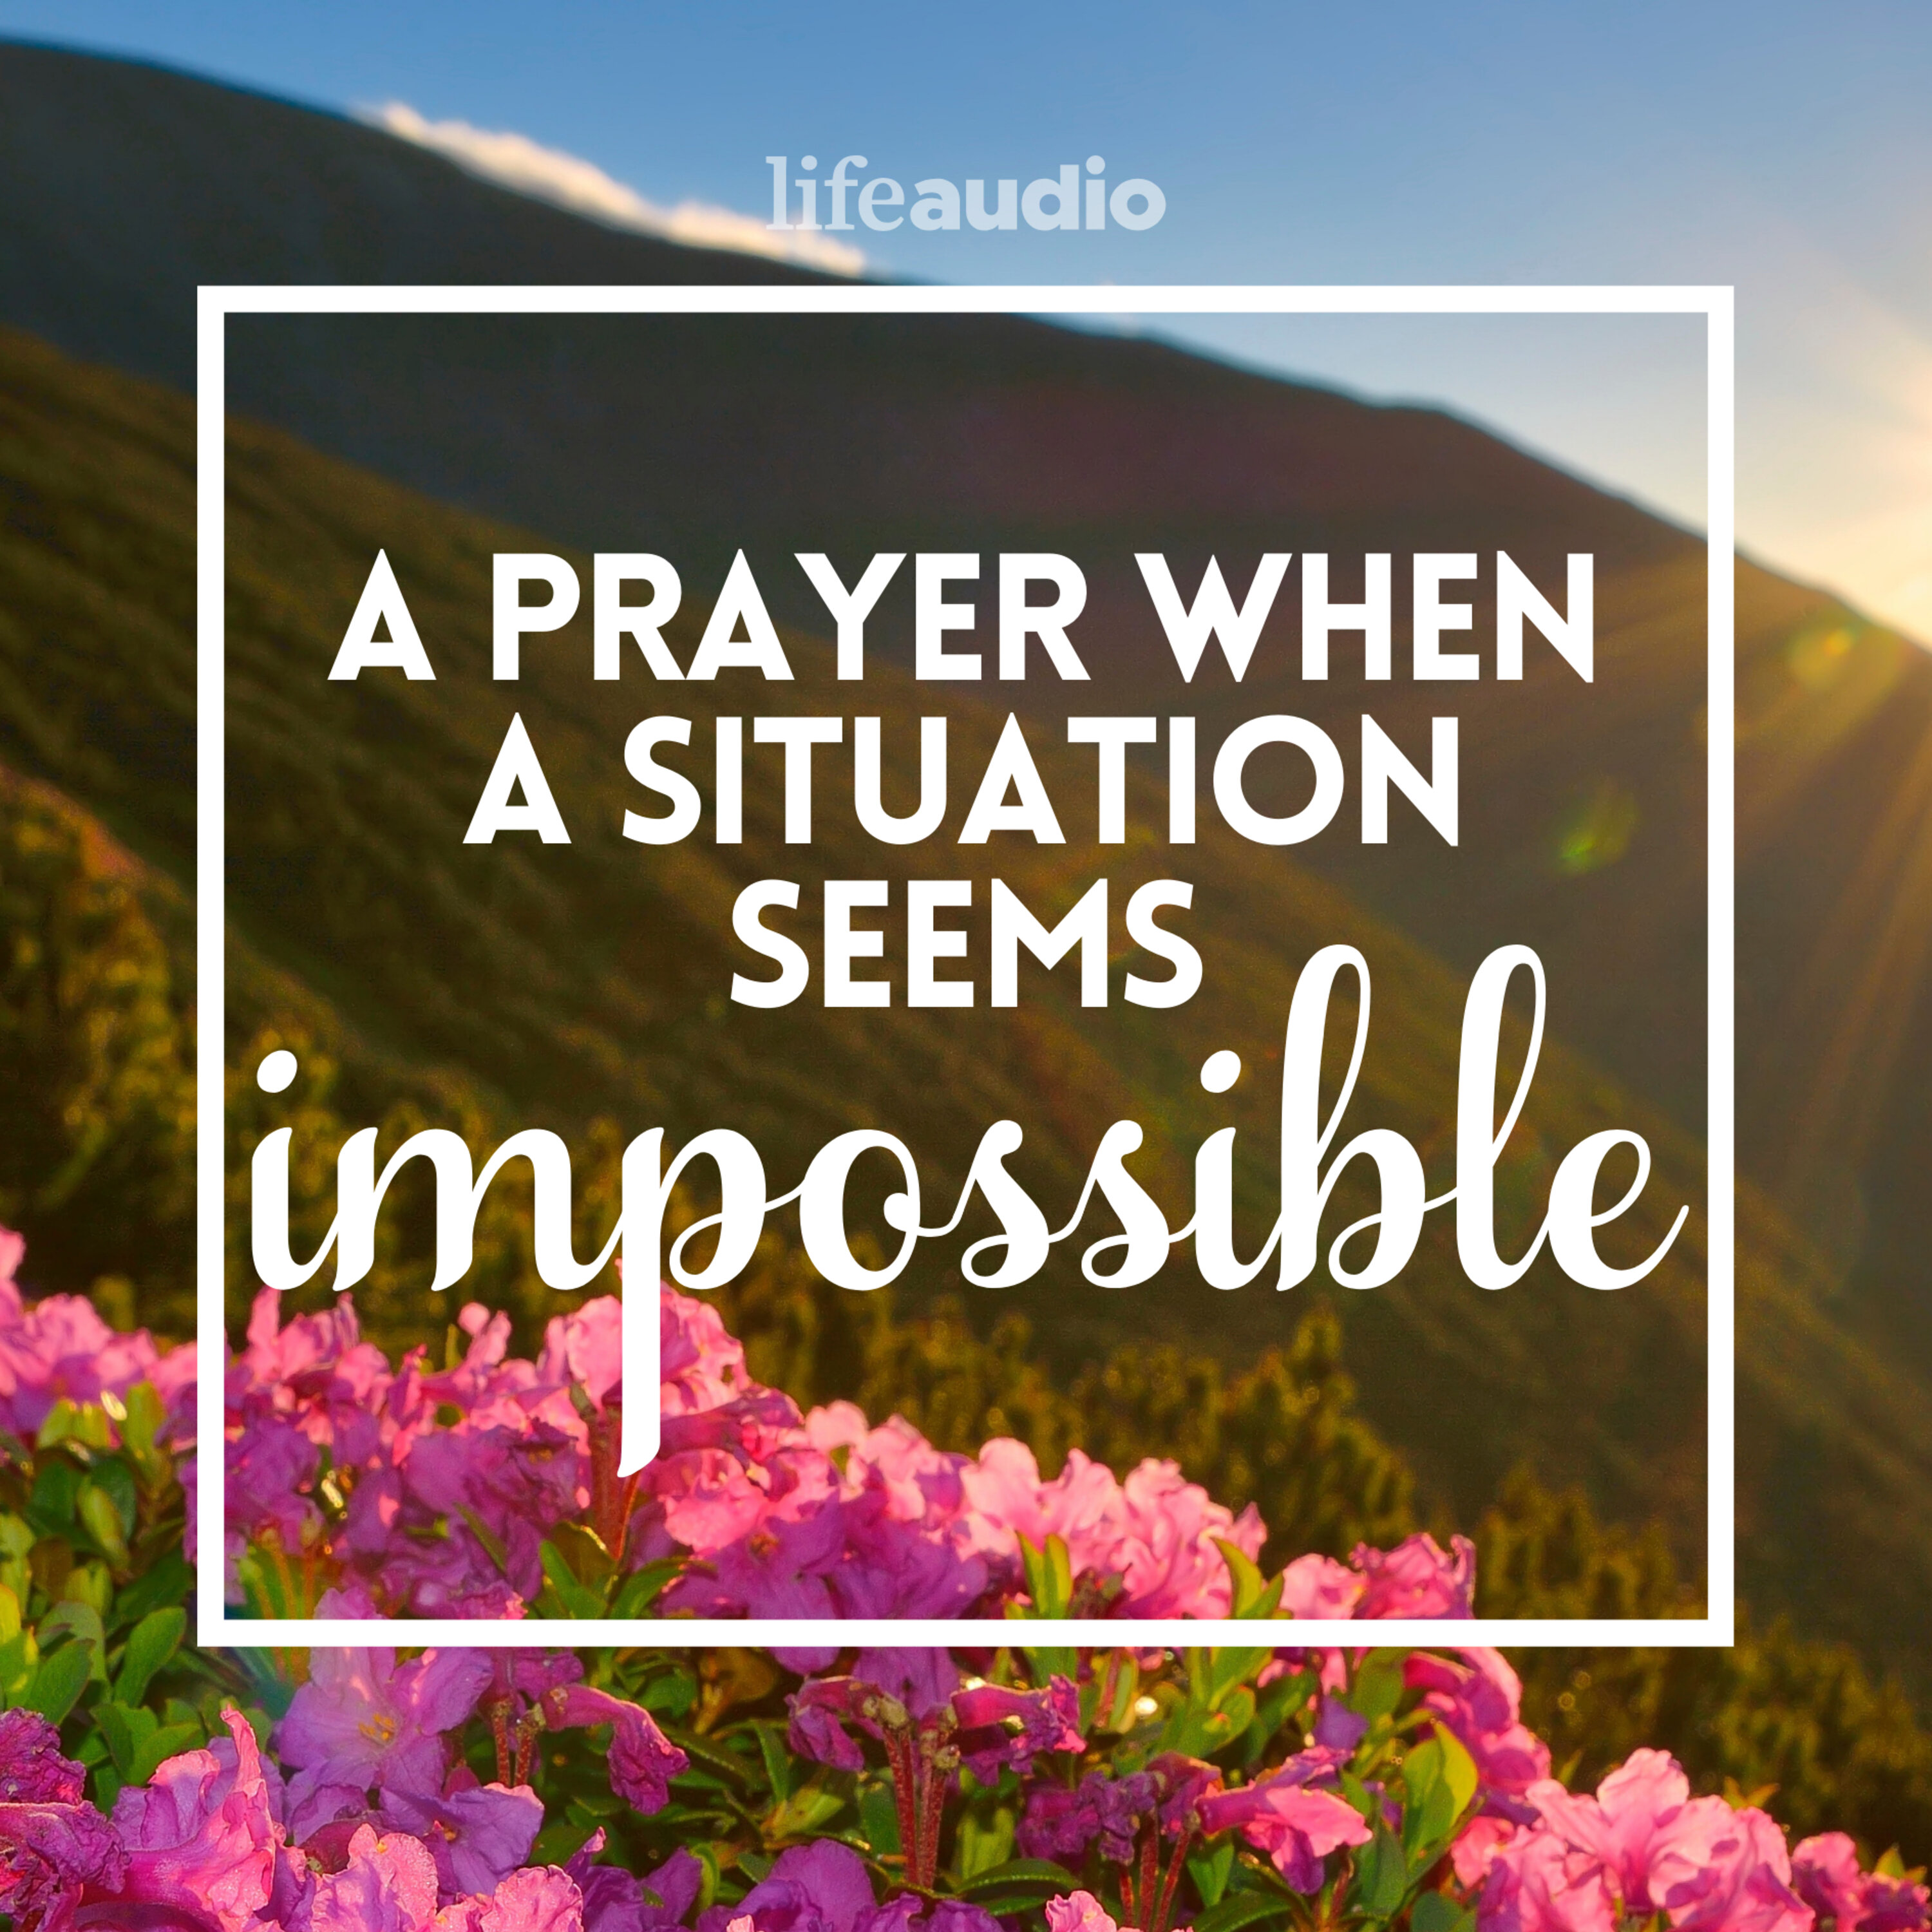 A Prayer When a Situation Seems Impossible